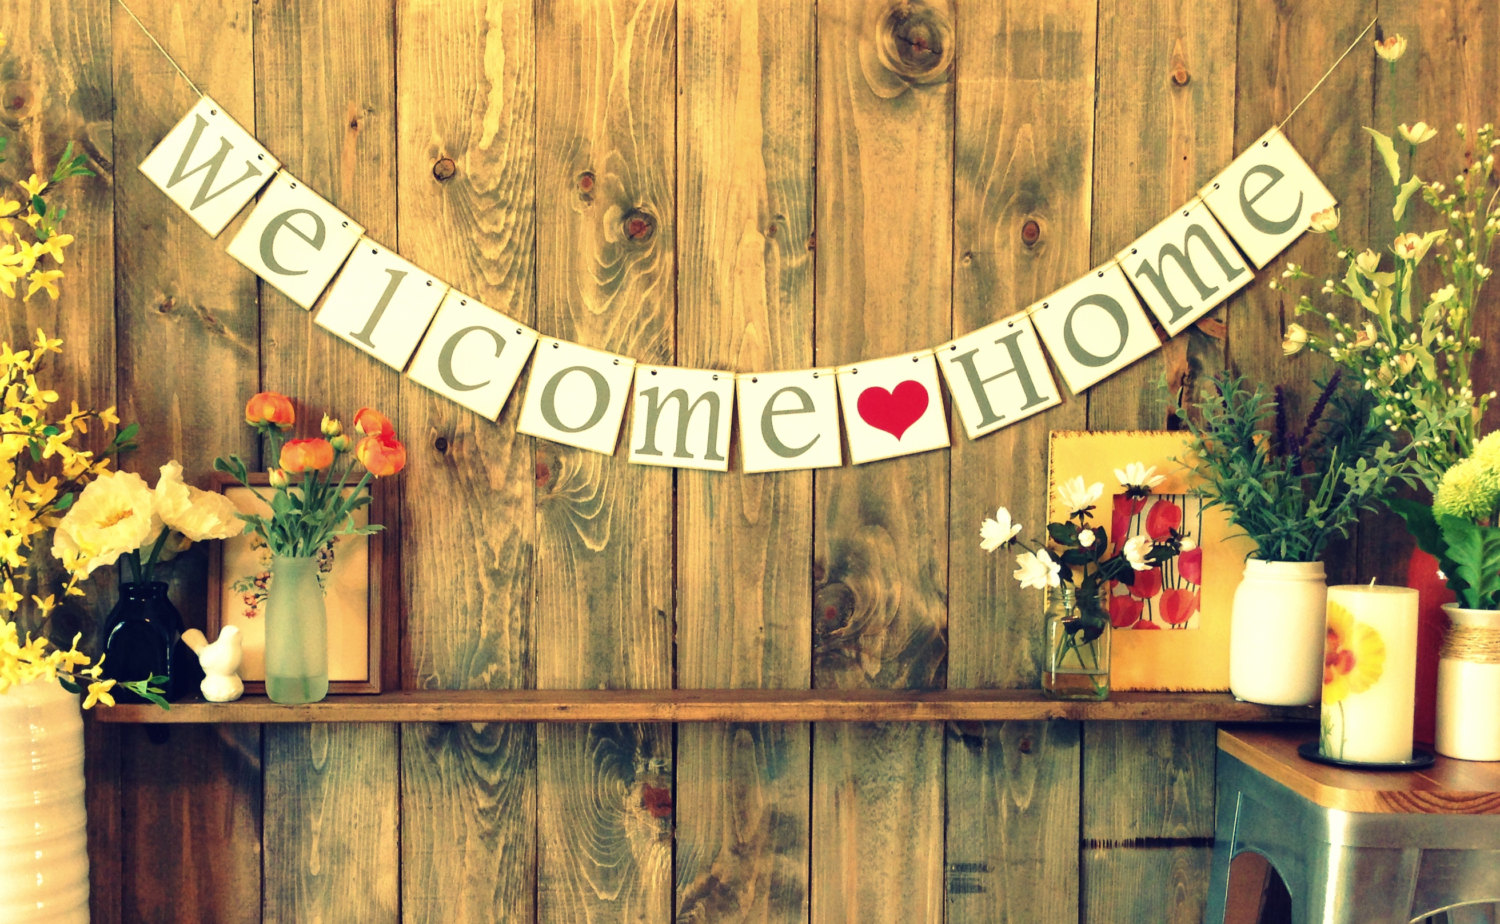 Welcome "Home" - A True Love Fairytale / Lessons of Love